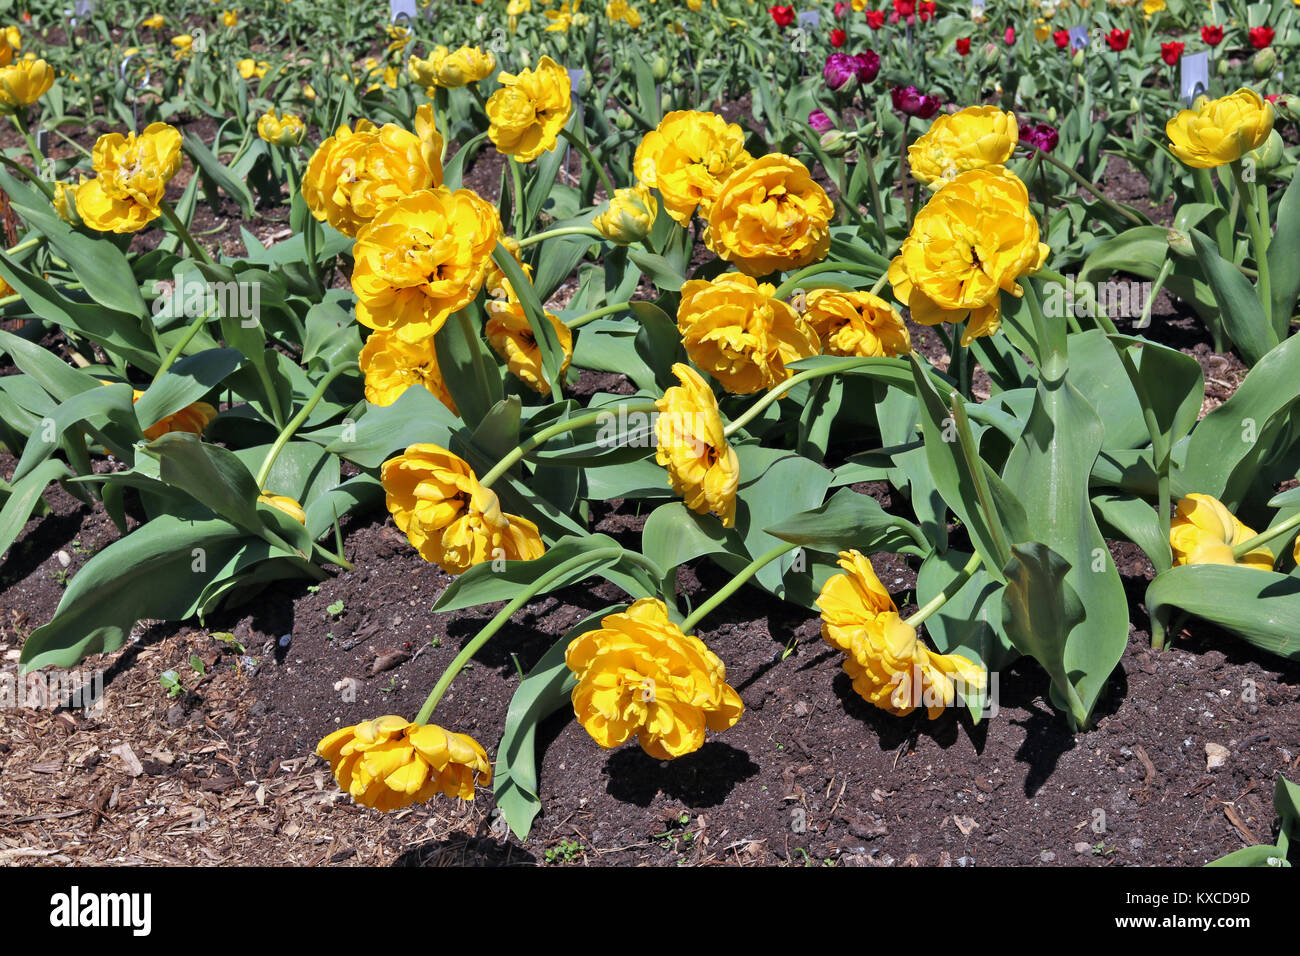 Yellow terry Dutch tulips blossom on a spring flower bed. Sunny May day outdoor shot Stock Photo